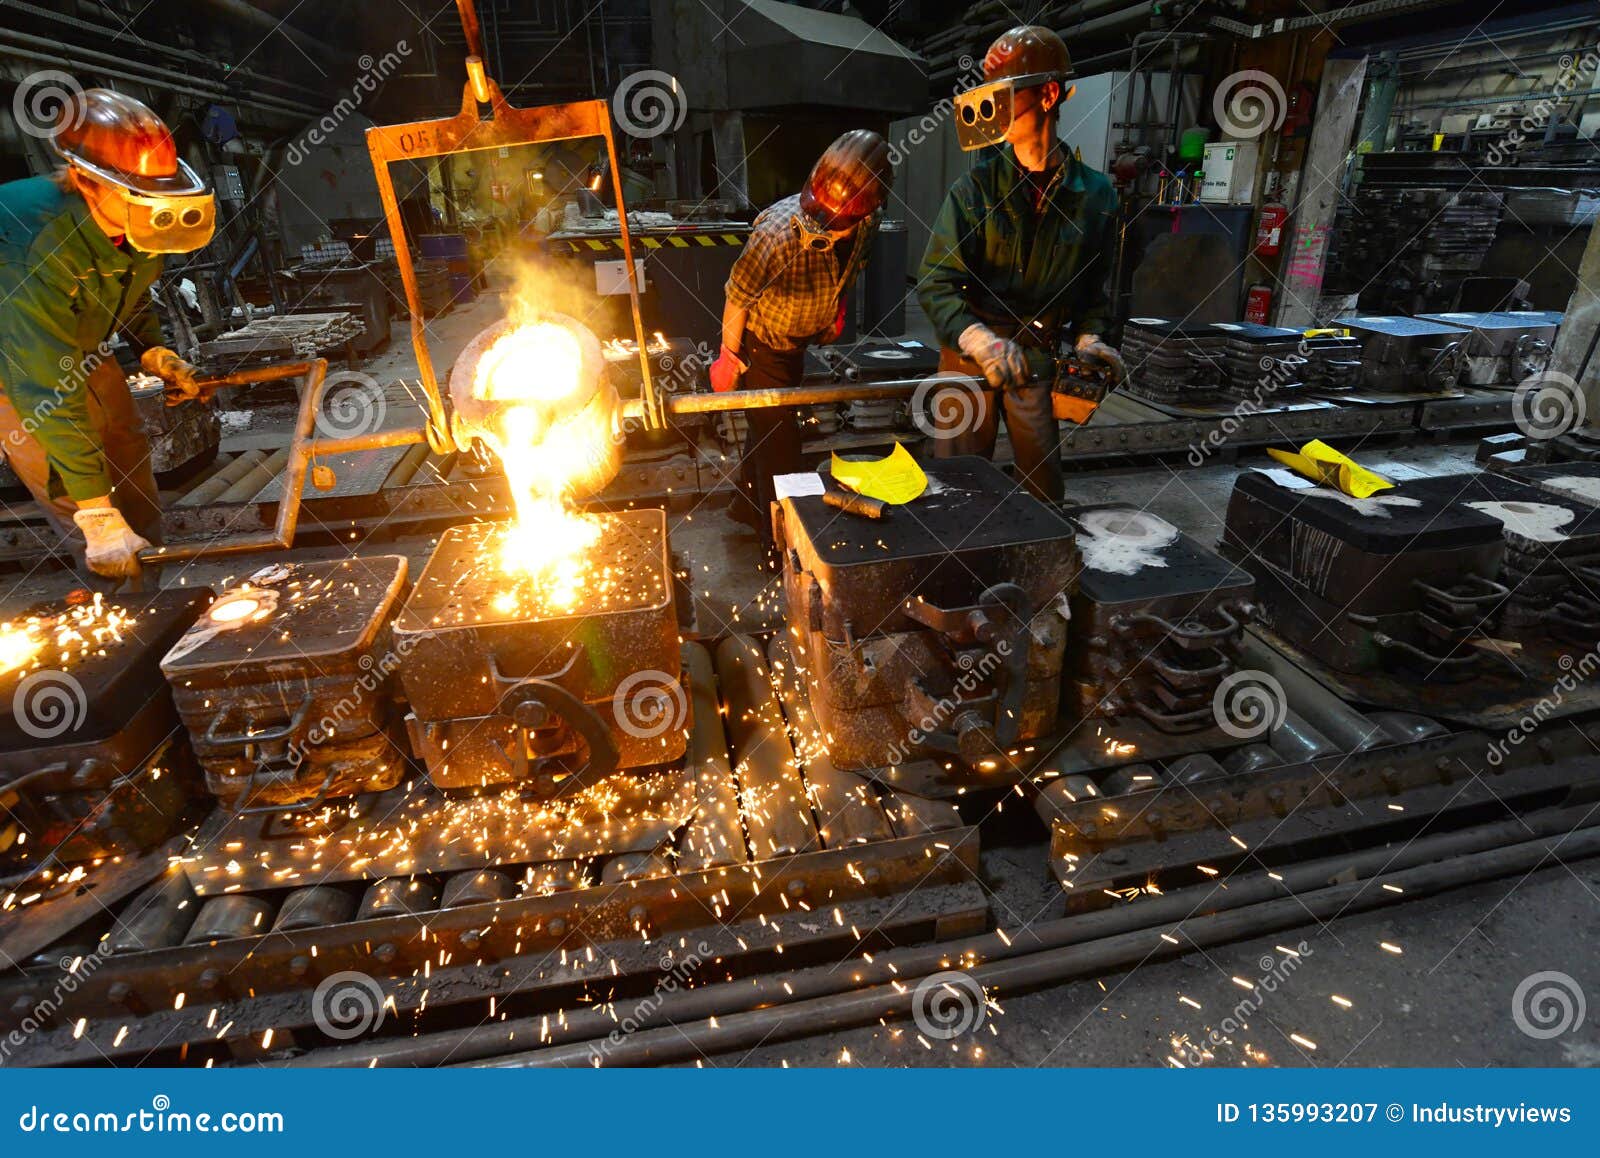 workers in a foundry casting a metal workpiece - safety at work and teamwork